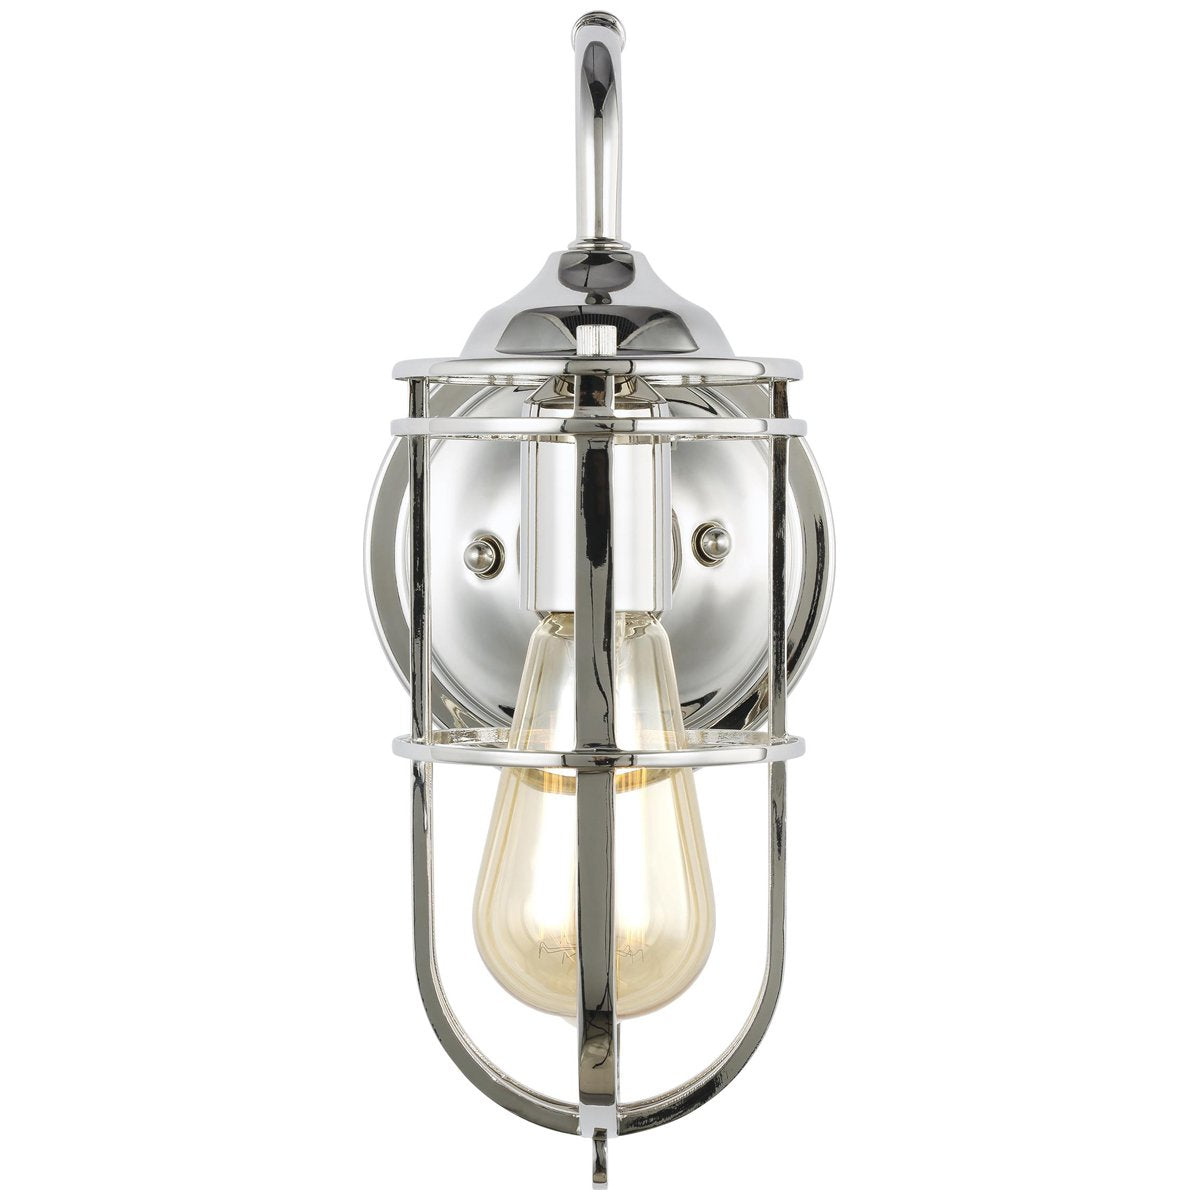 Feiss Urban Renewal 1-Light Wall Sconce - Polished Nickel